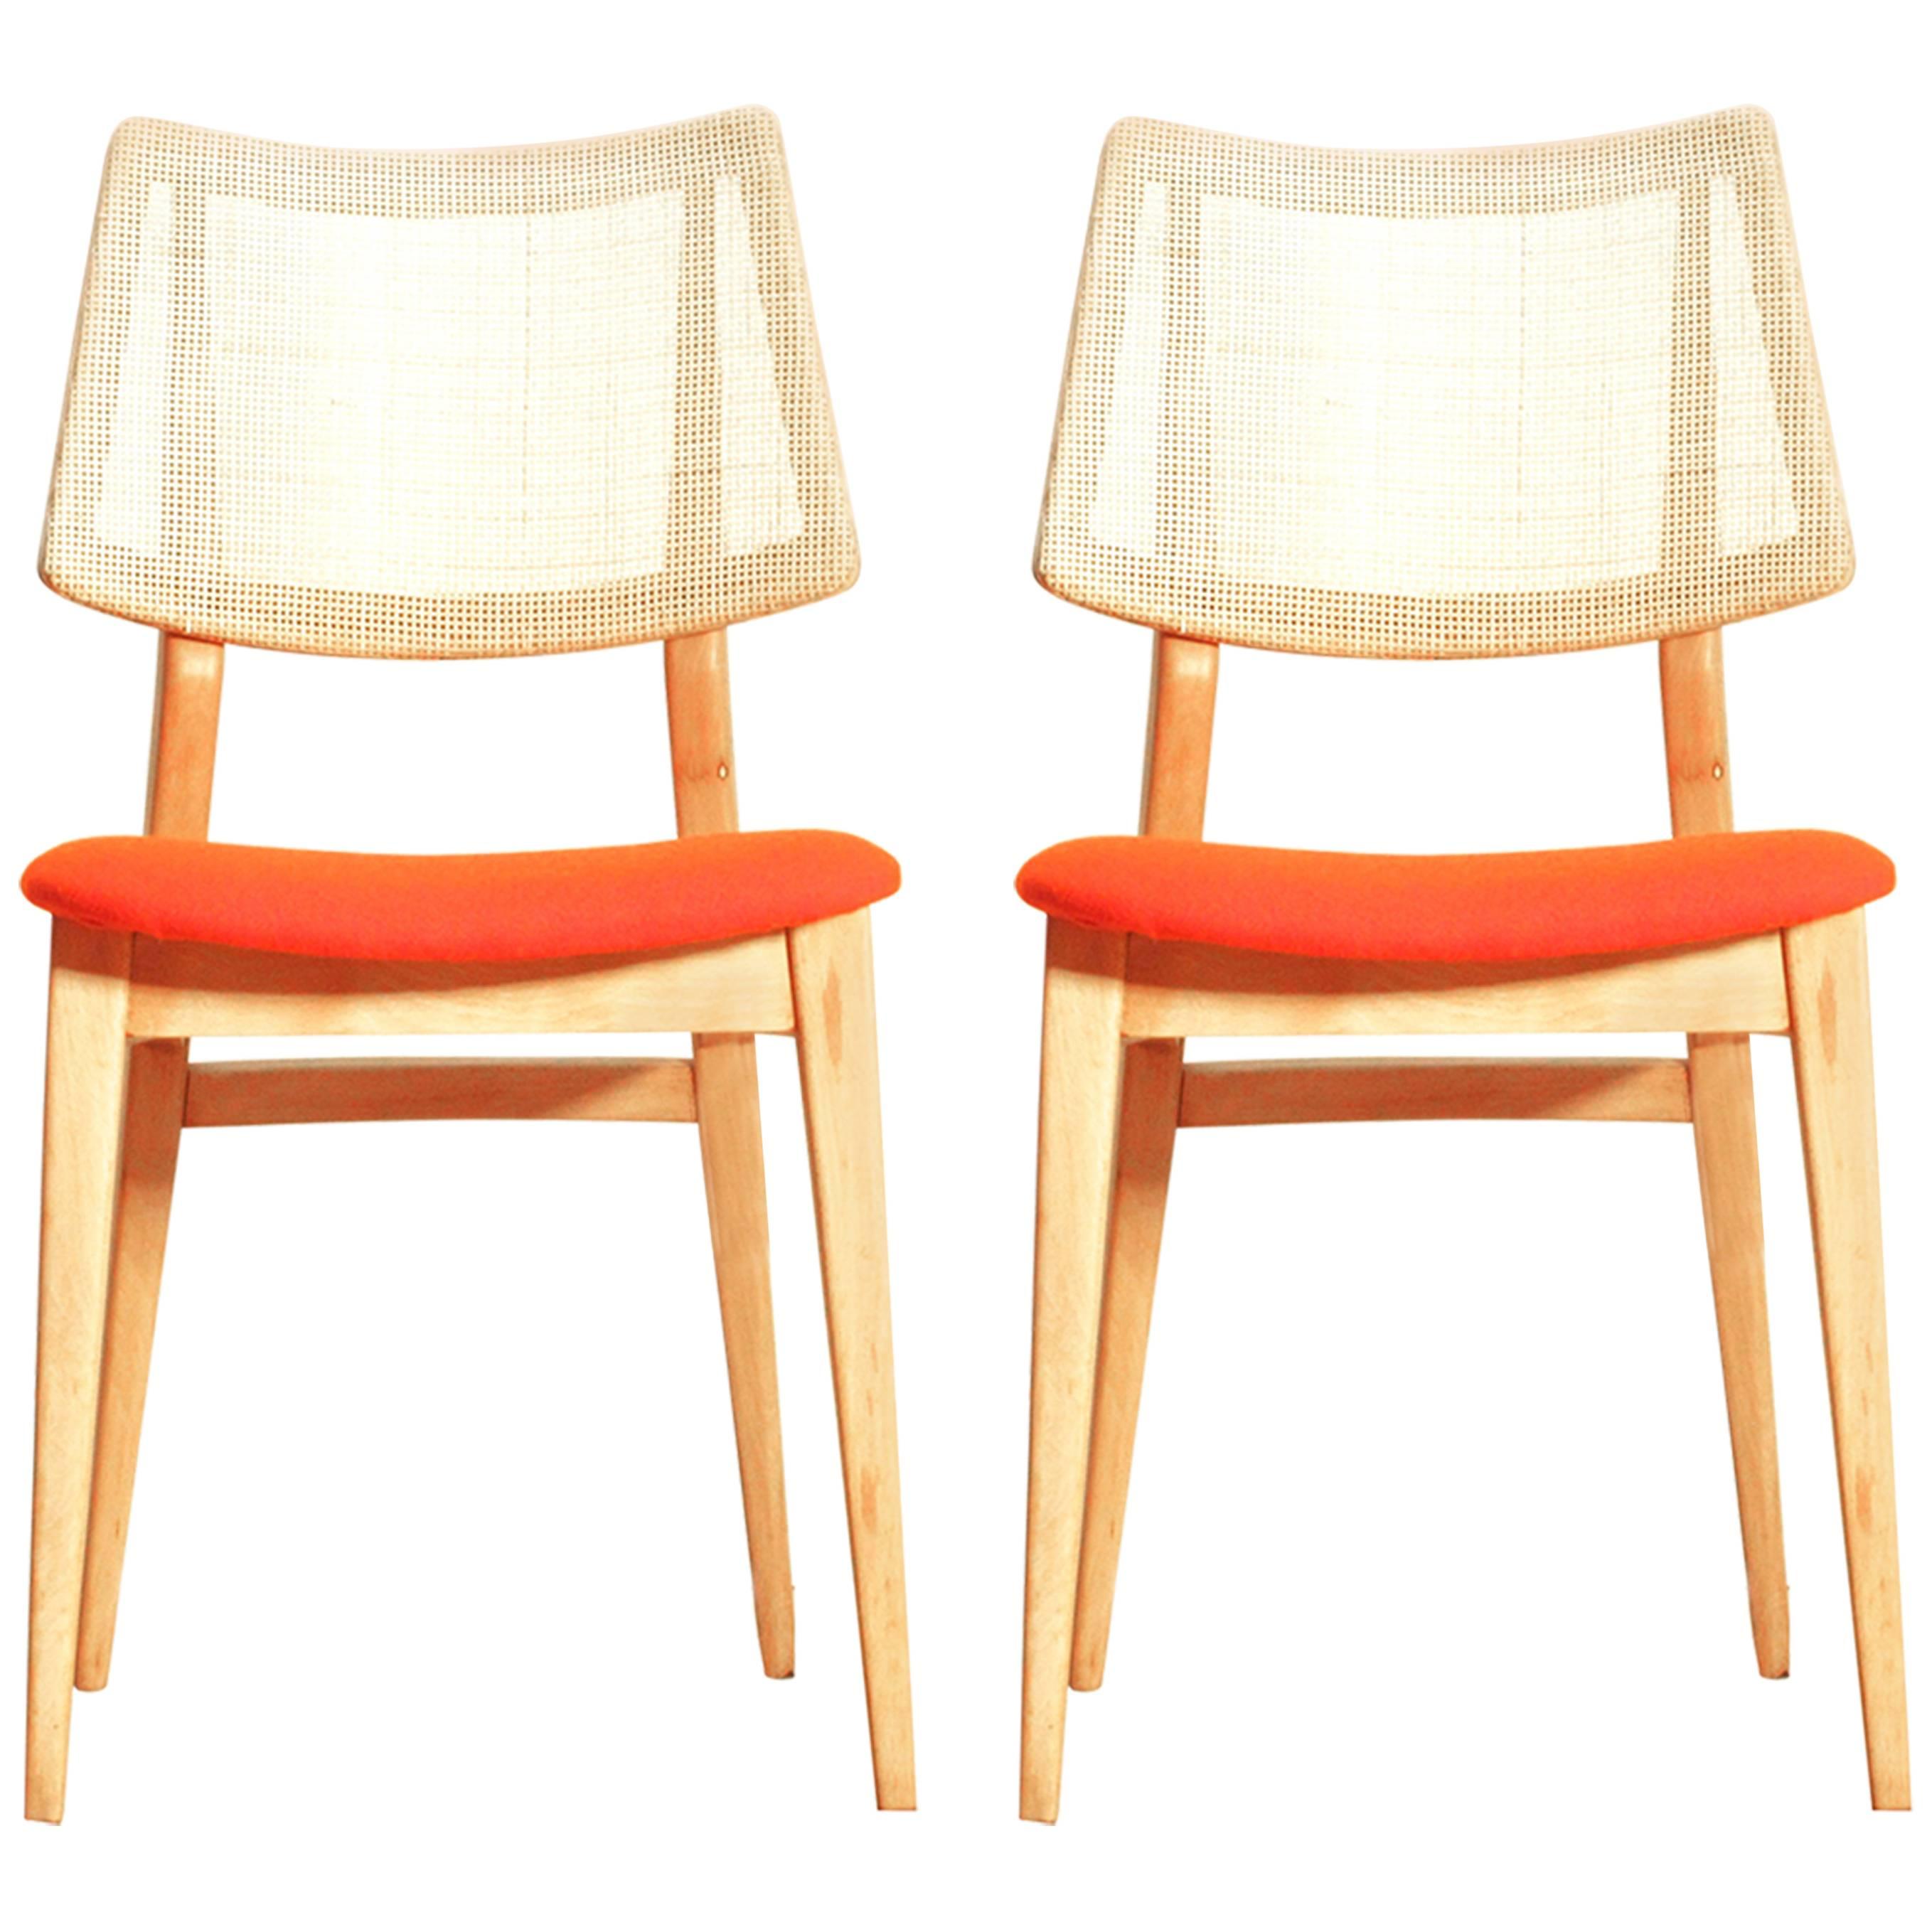 Organic Shape 1960s Spanish Beech Chair, Set of Two For Sale